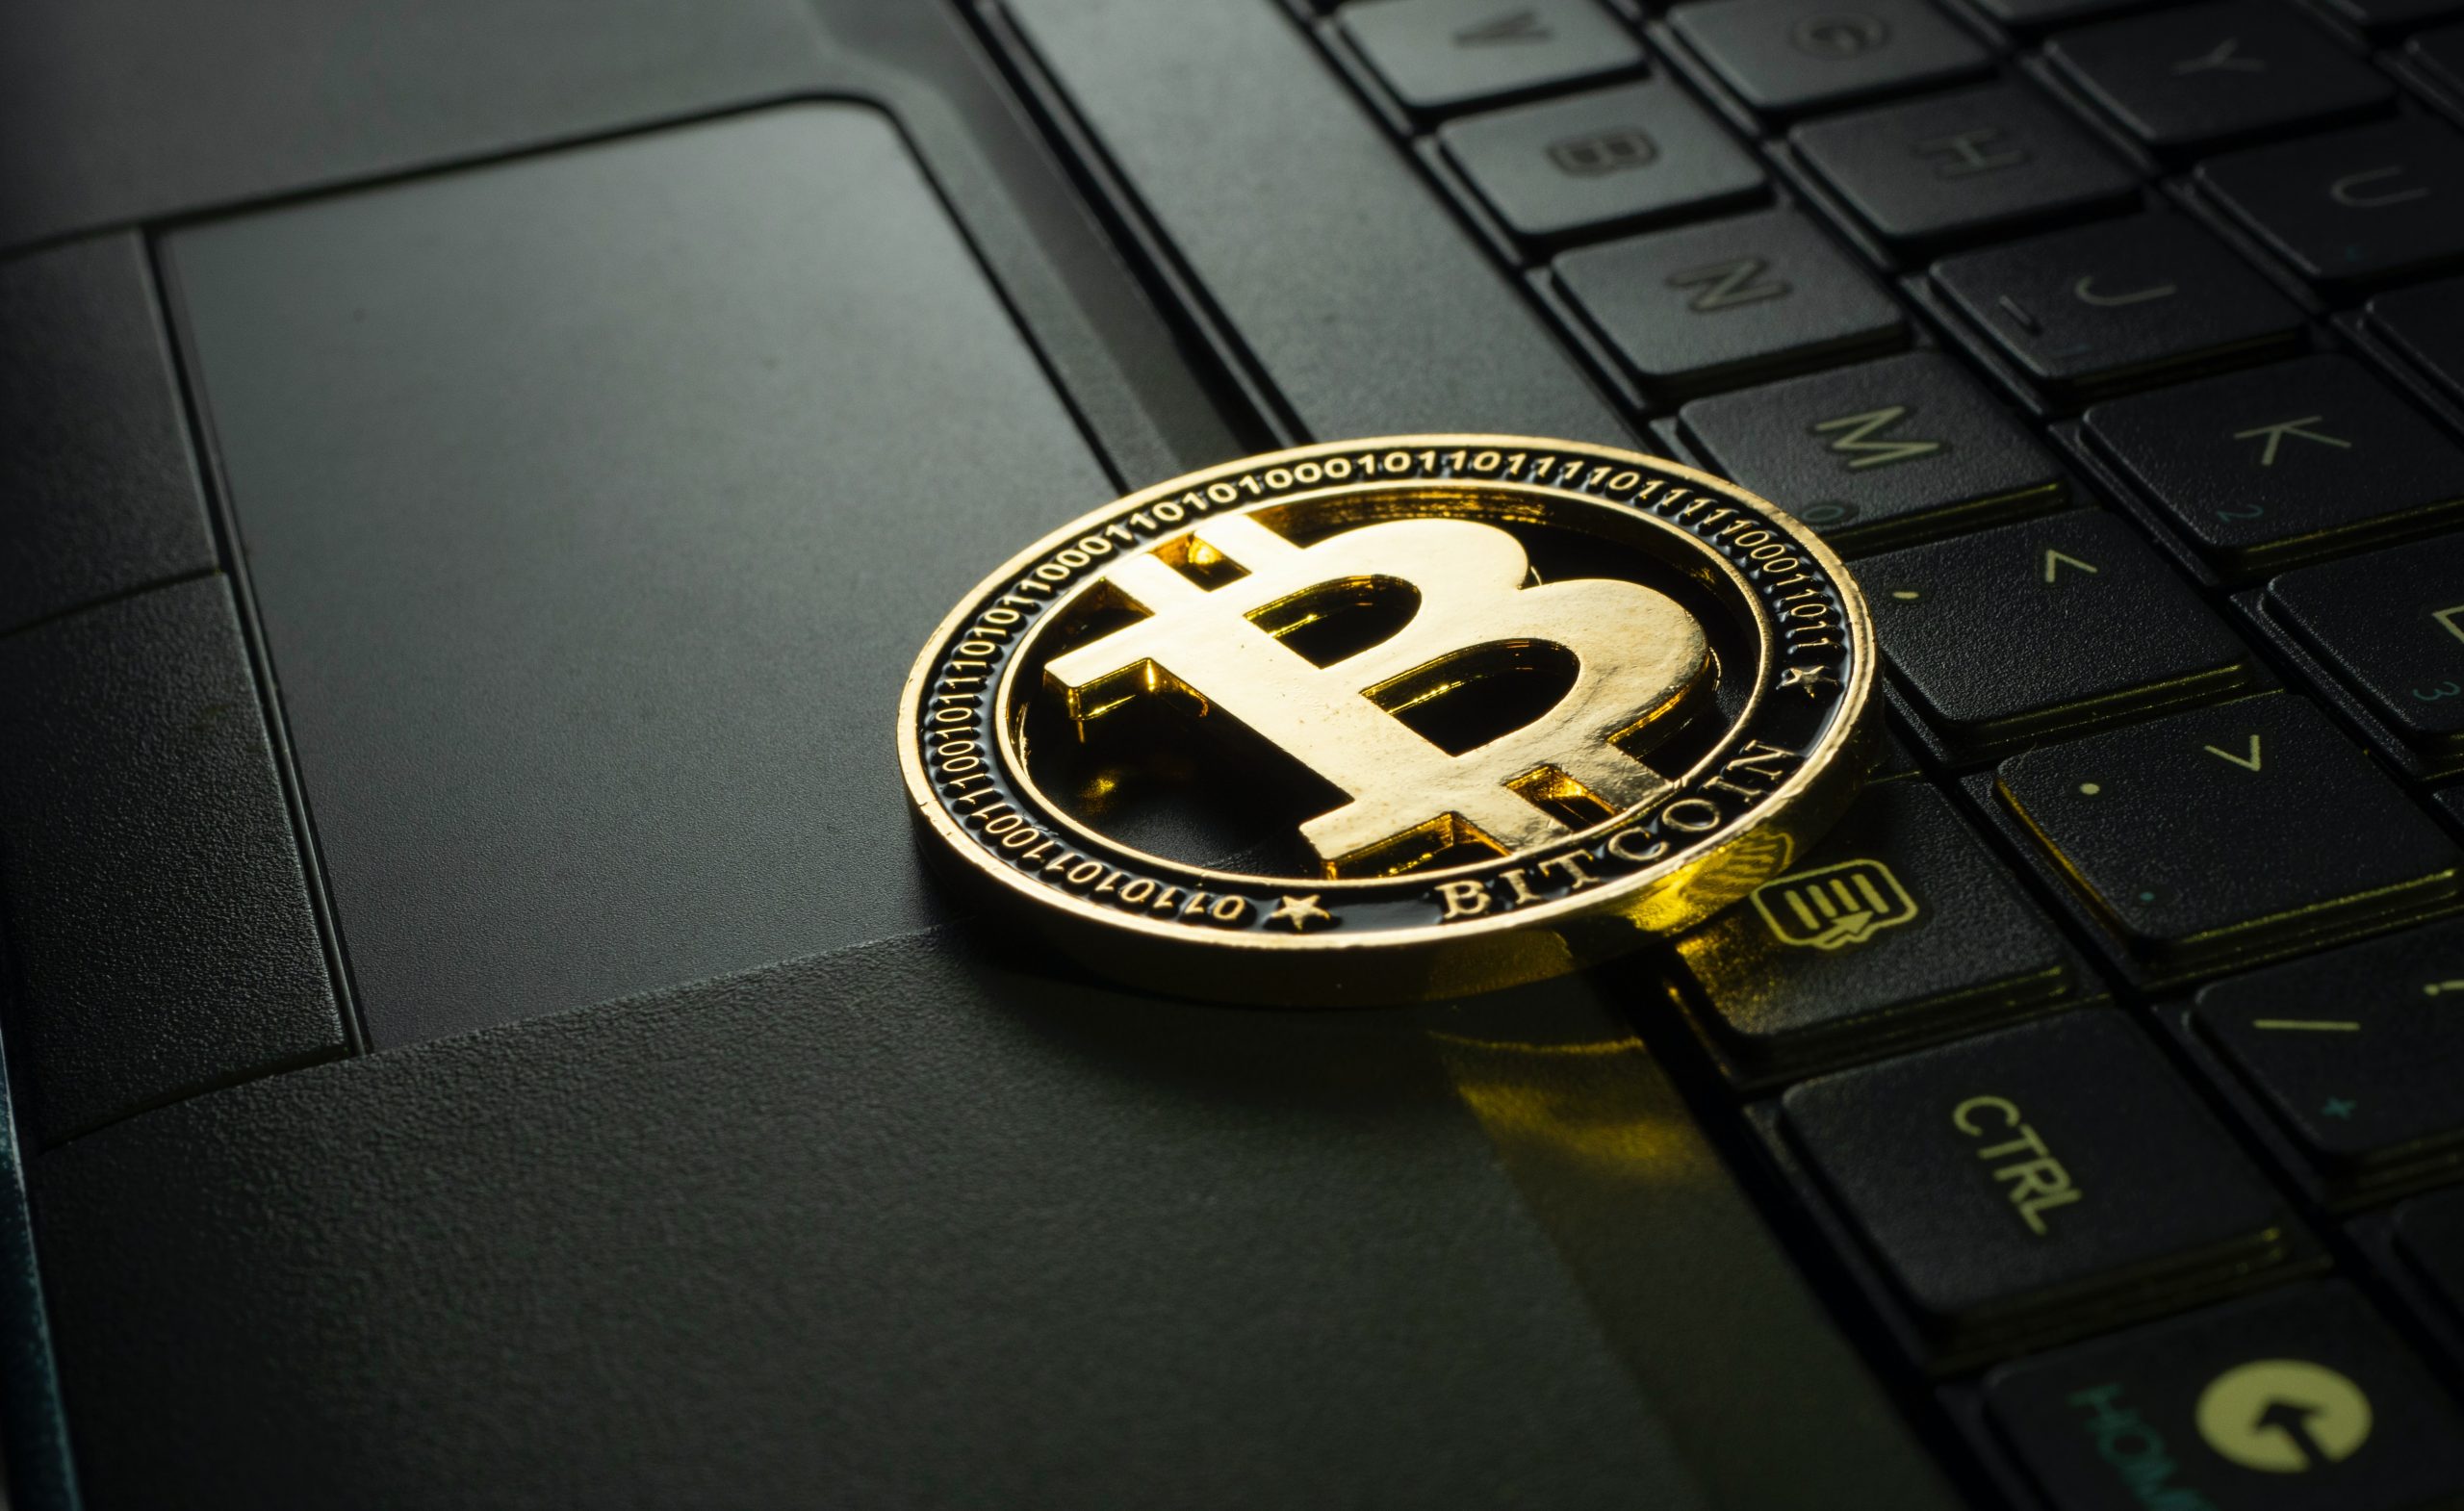 Leading Cryptocurrency ATM Manufacturer General Bytes Loses $1.5M in Bitcoin in Hacking Attack